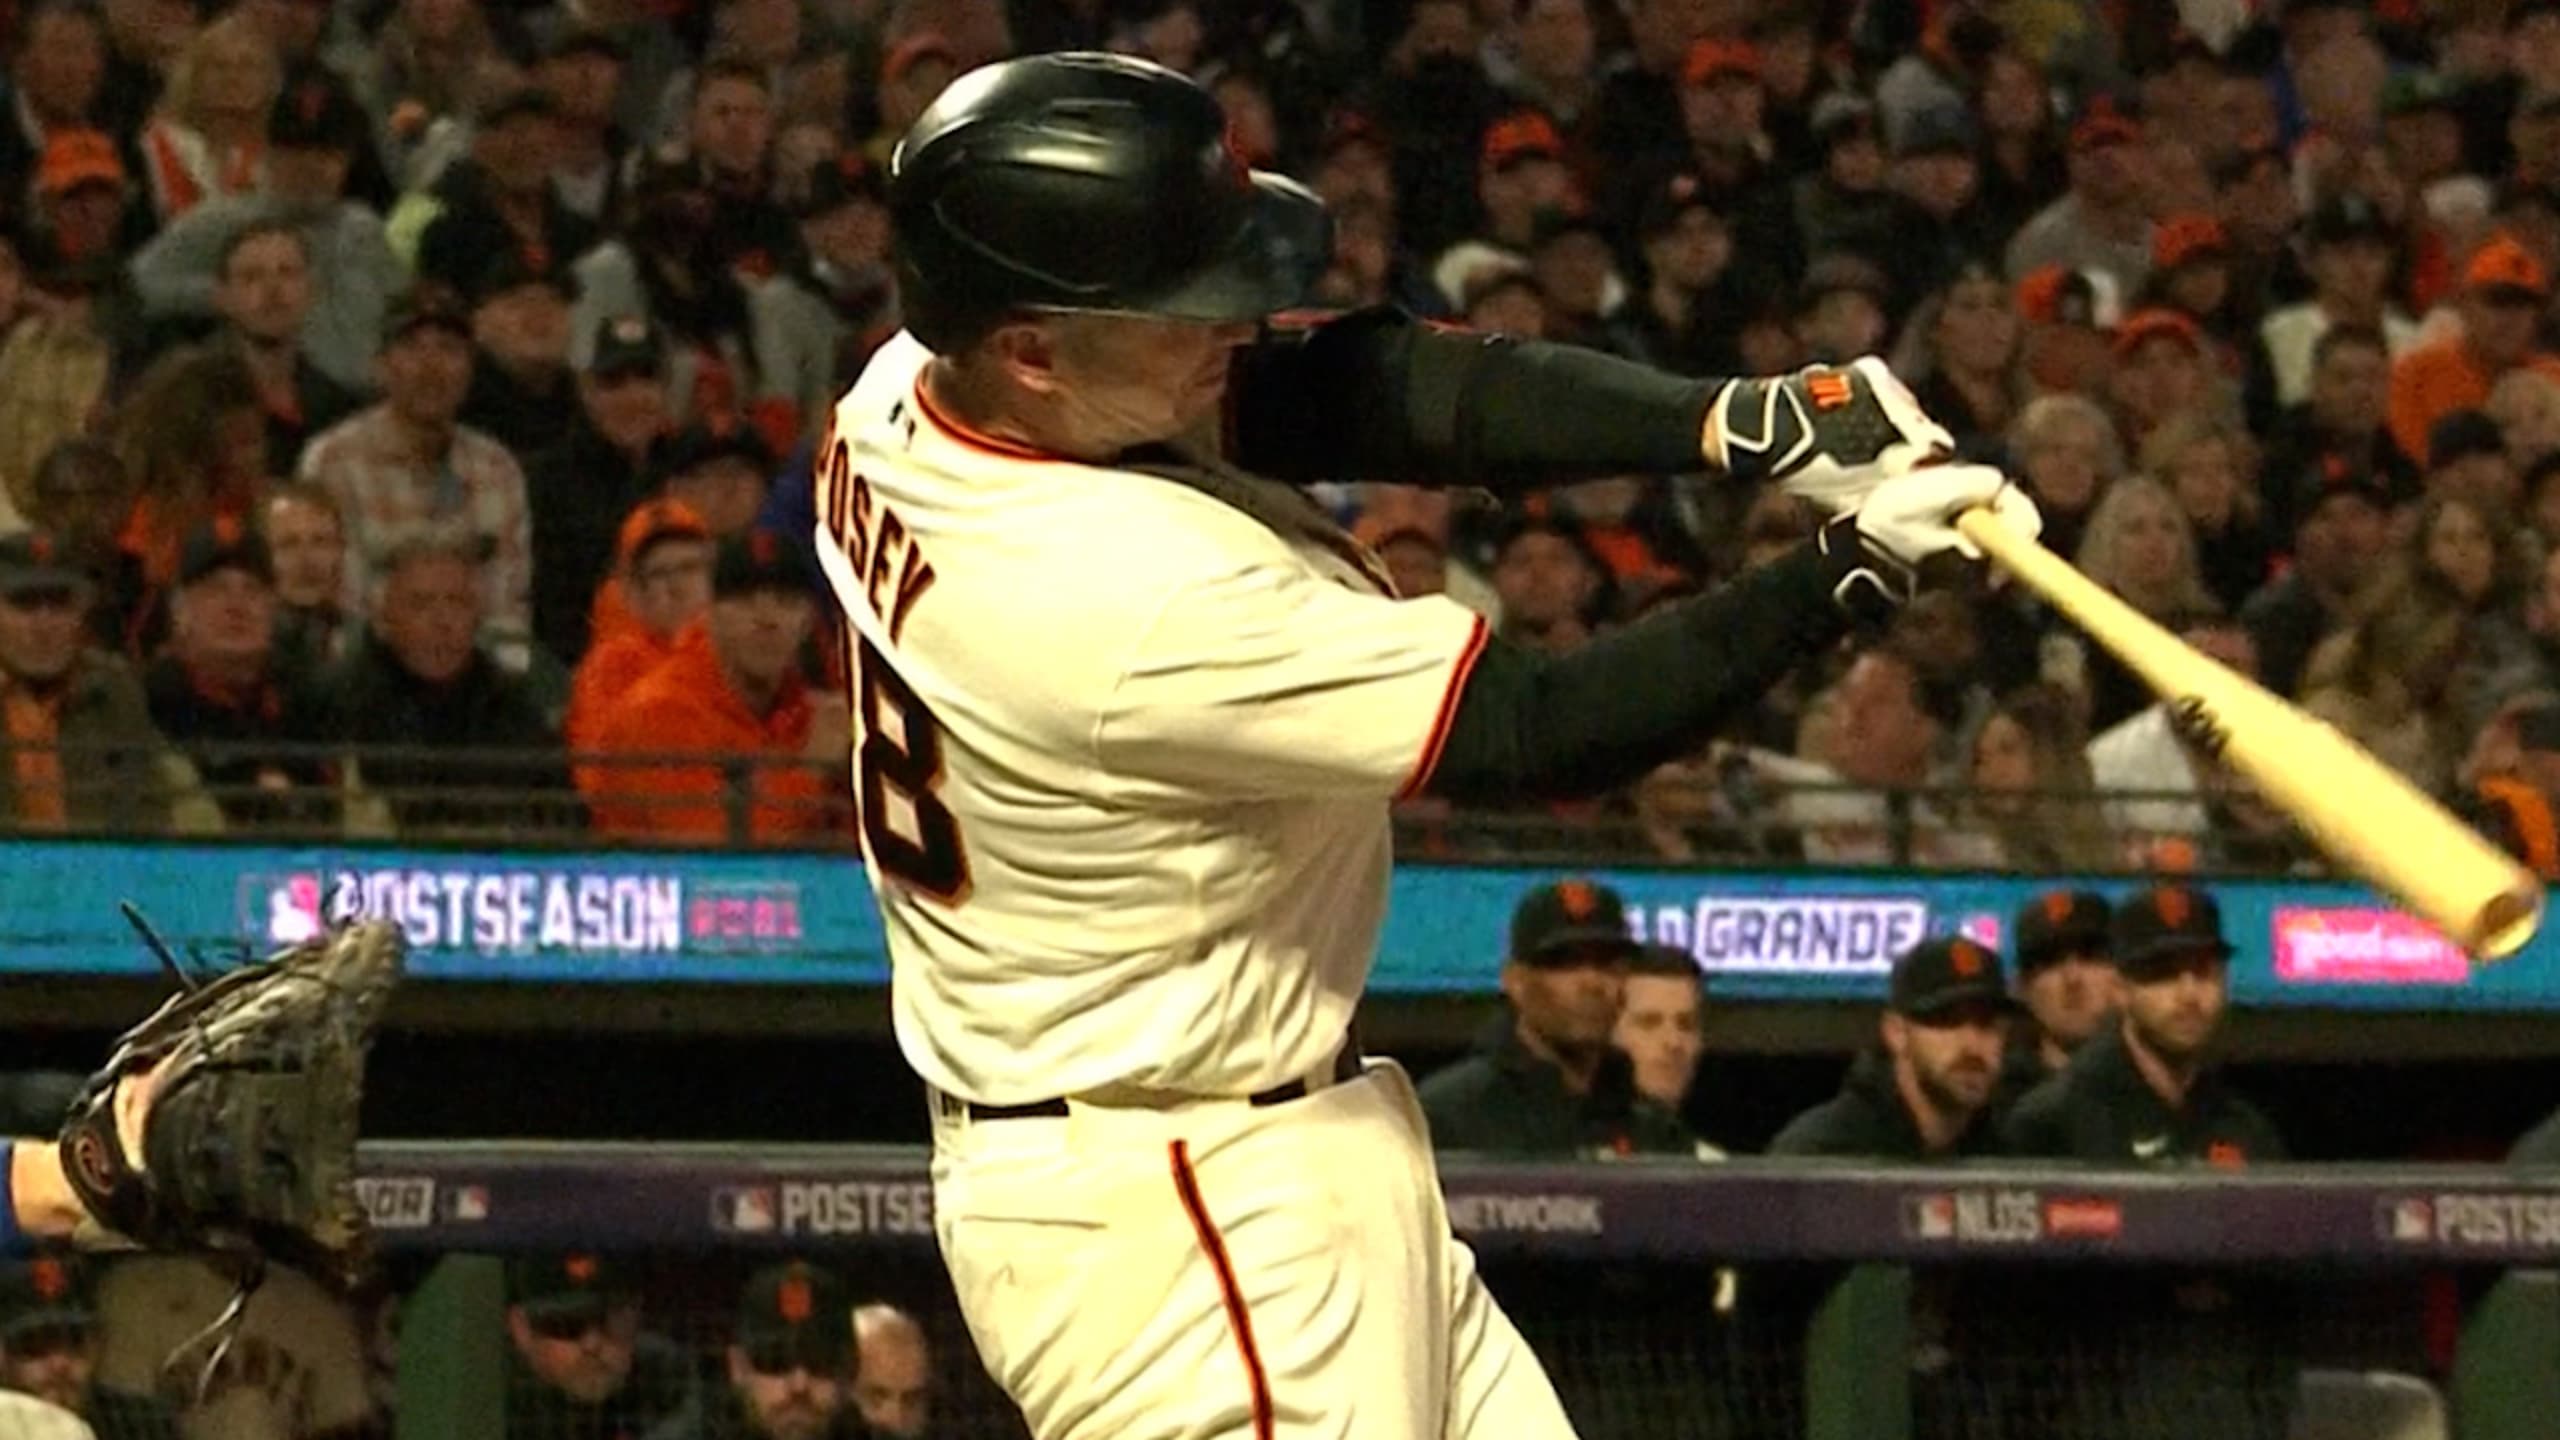 We'll See You in Cooperstown, Buster Posey